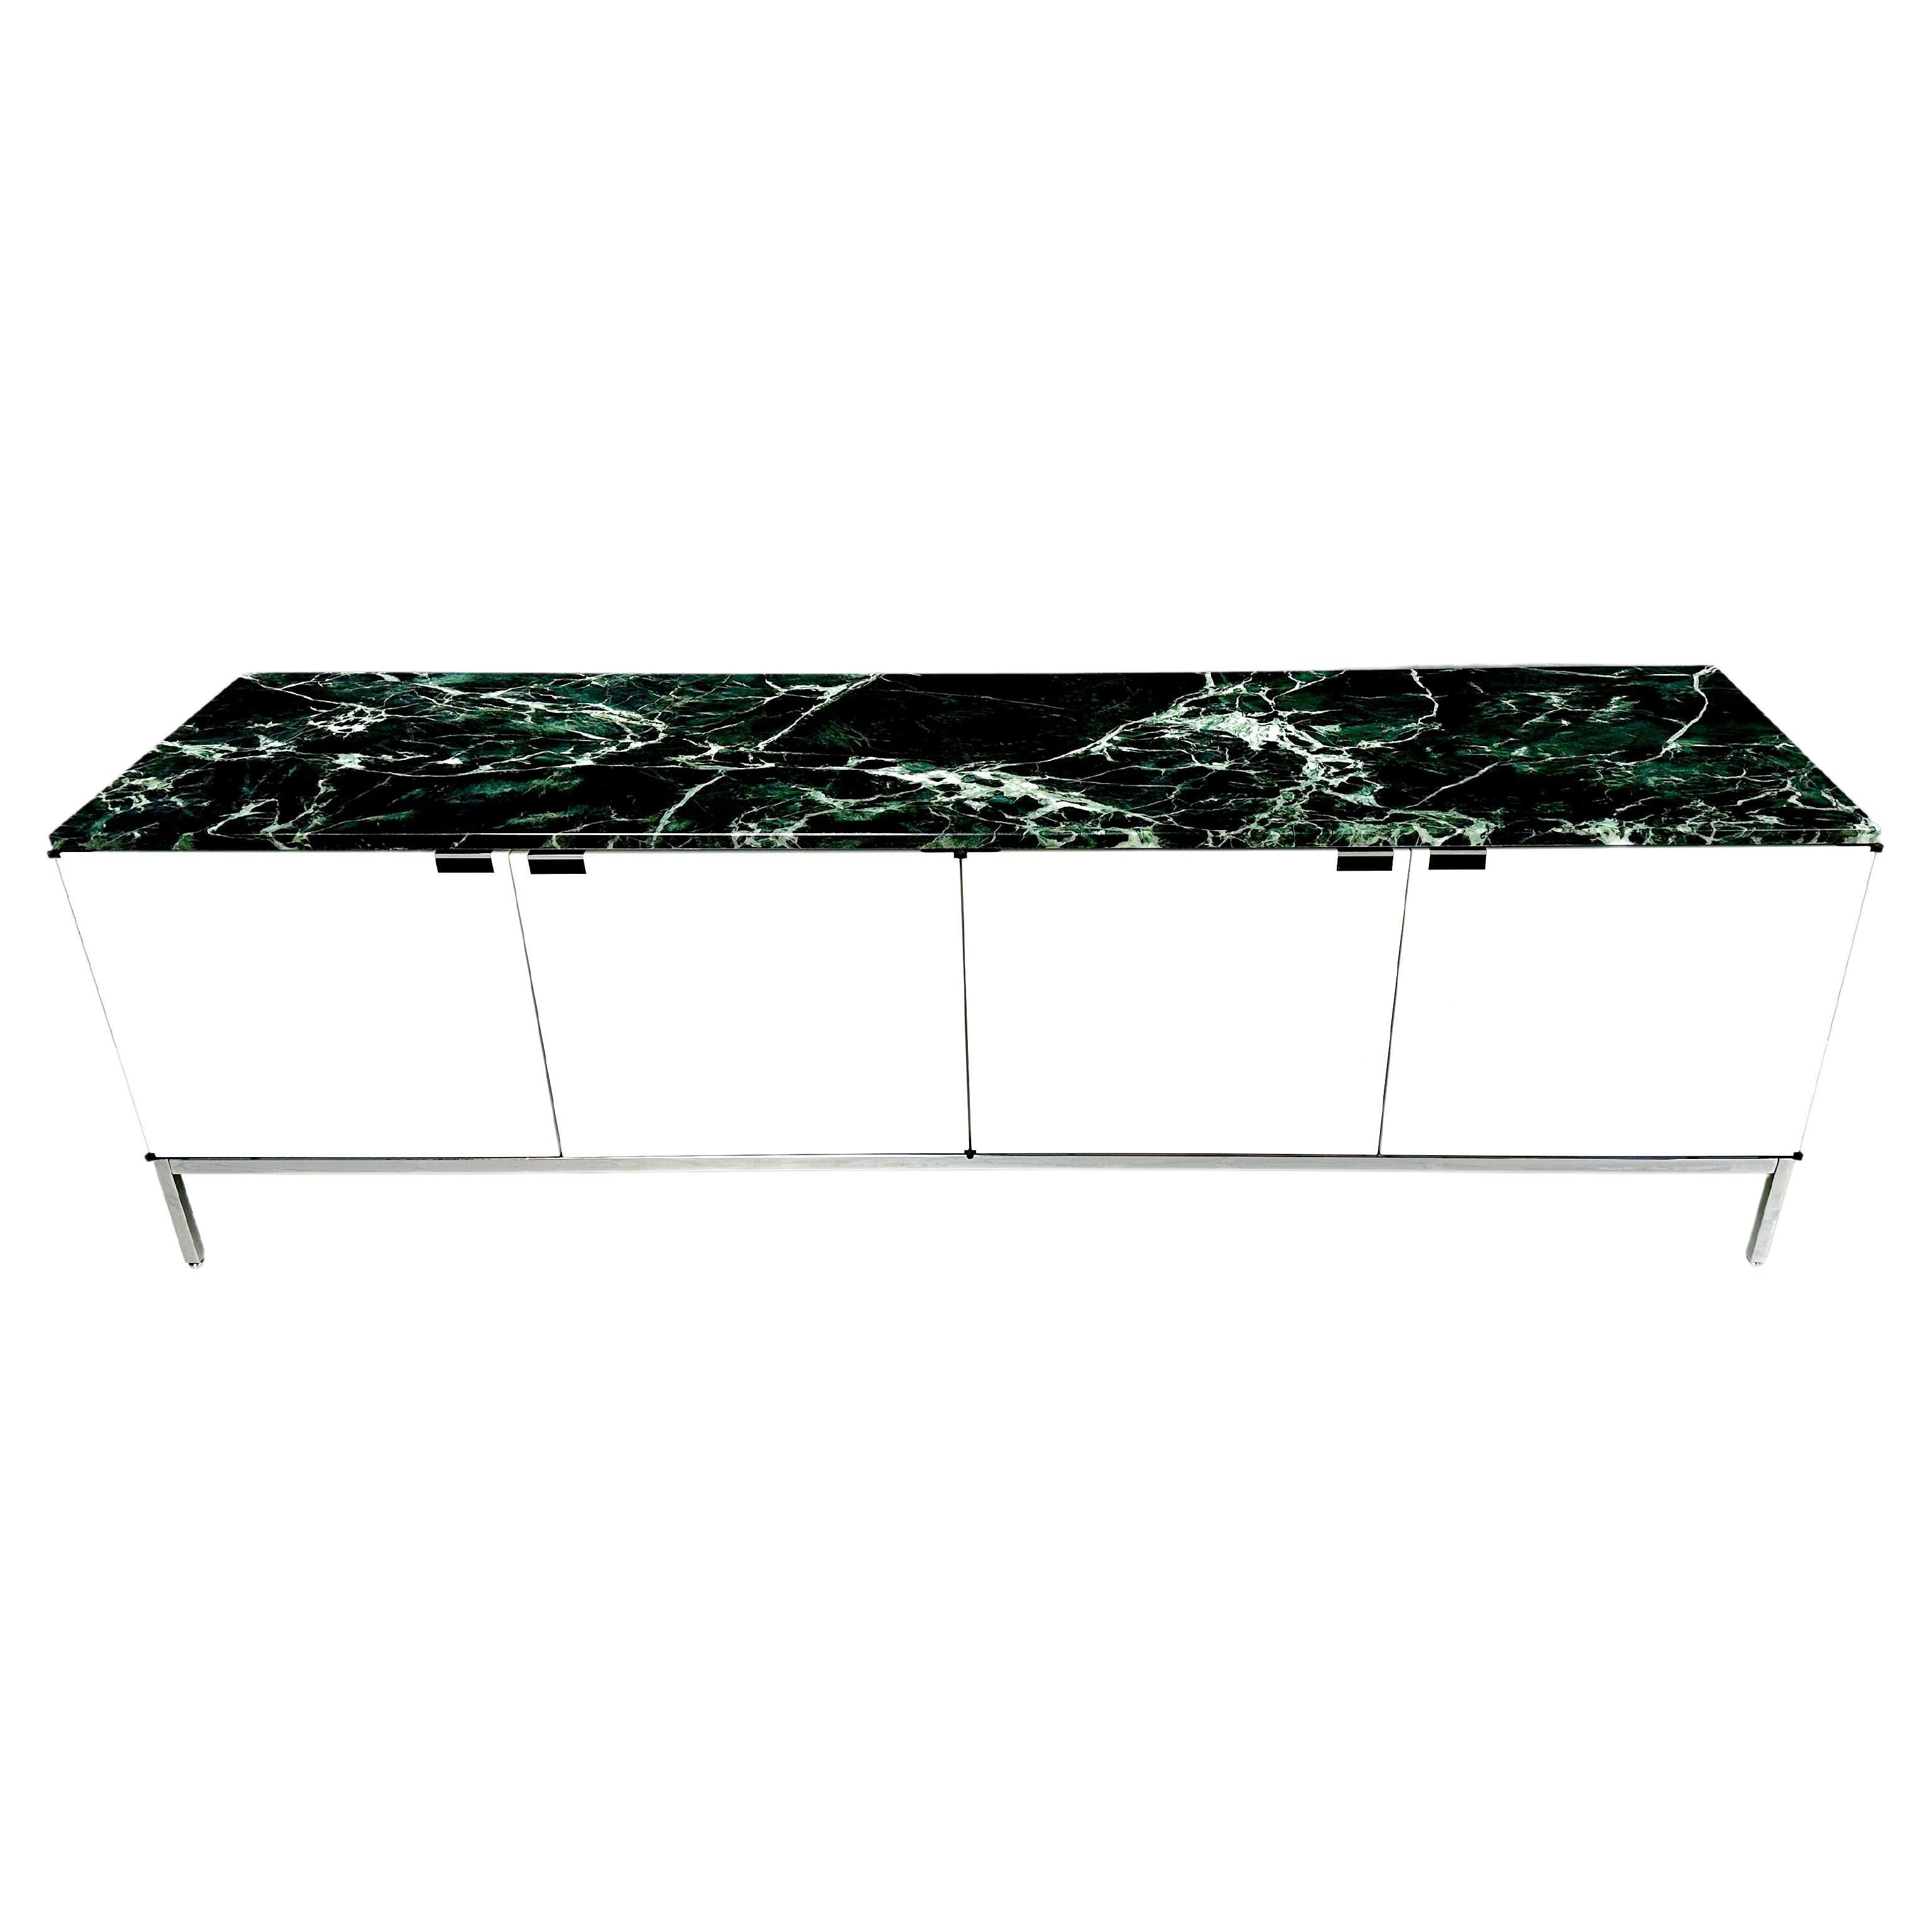 Florence Knoll Credenza New Edition with Alpi Verdi Marble Top, 2010s